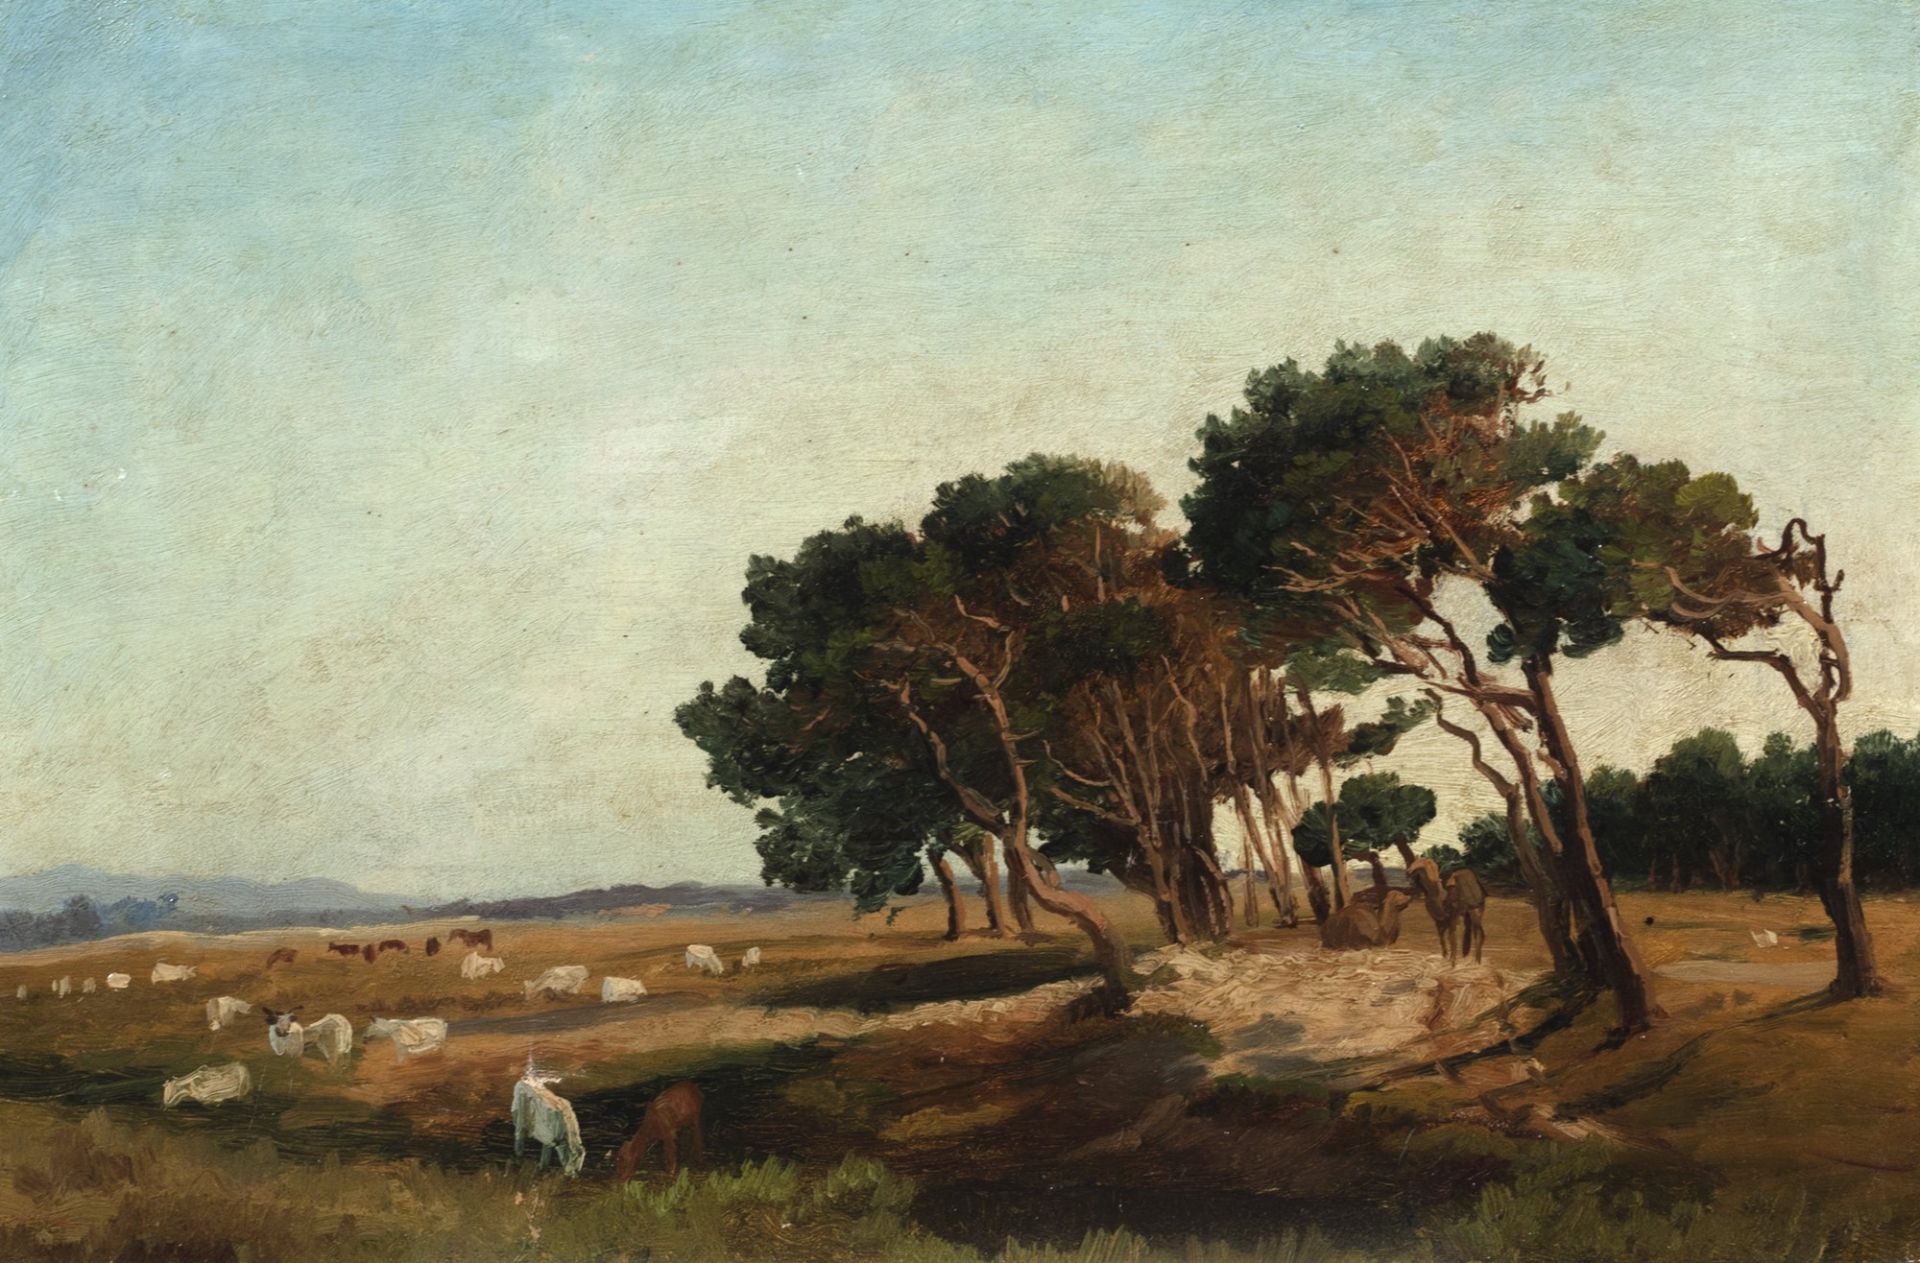 Giuseppe Haimann (Milano 1828-Alessandria d'Egitto 1883) - Pasture in the Middle East